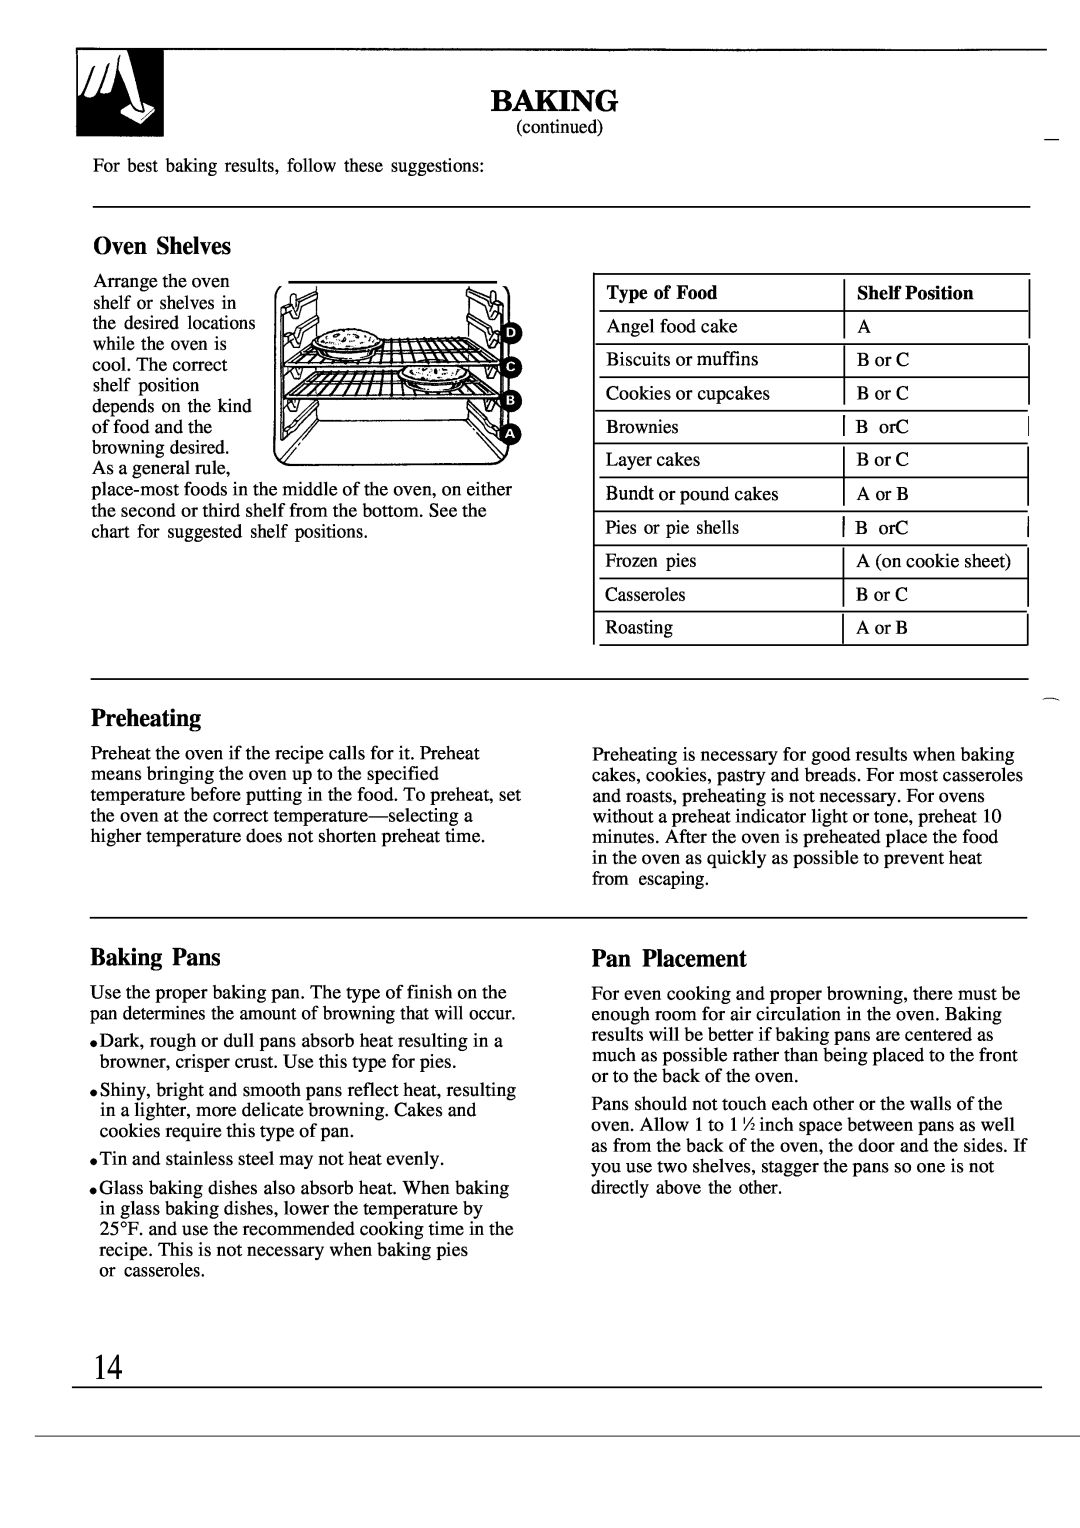 GE 49-8319, MNU109I, JGSC12GER, 164 D2588P120 operating instructions Preheating, Baking Pans, Pan Placement, Oven Shelves 